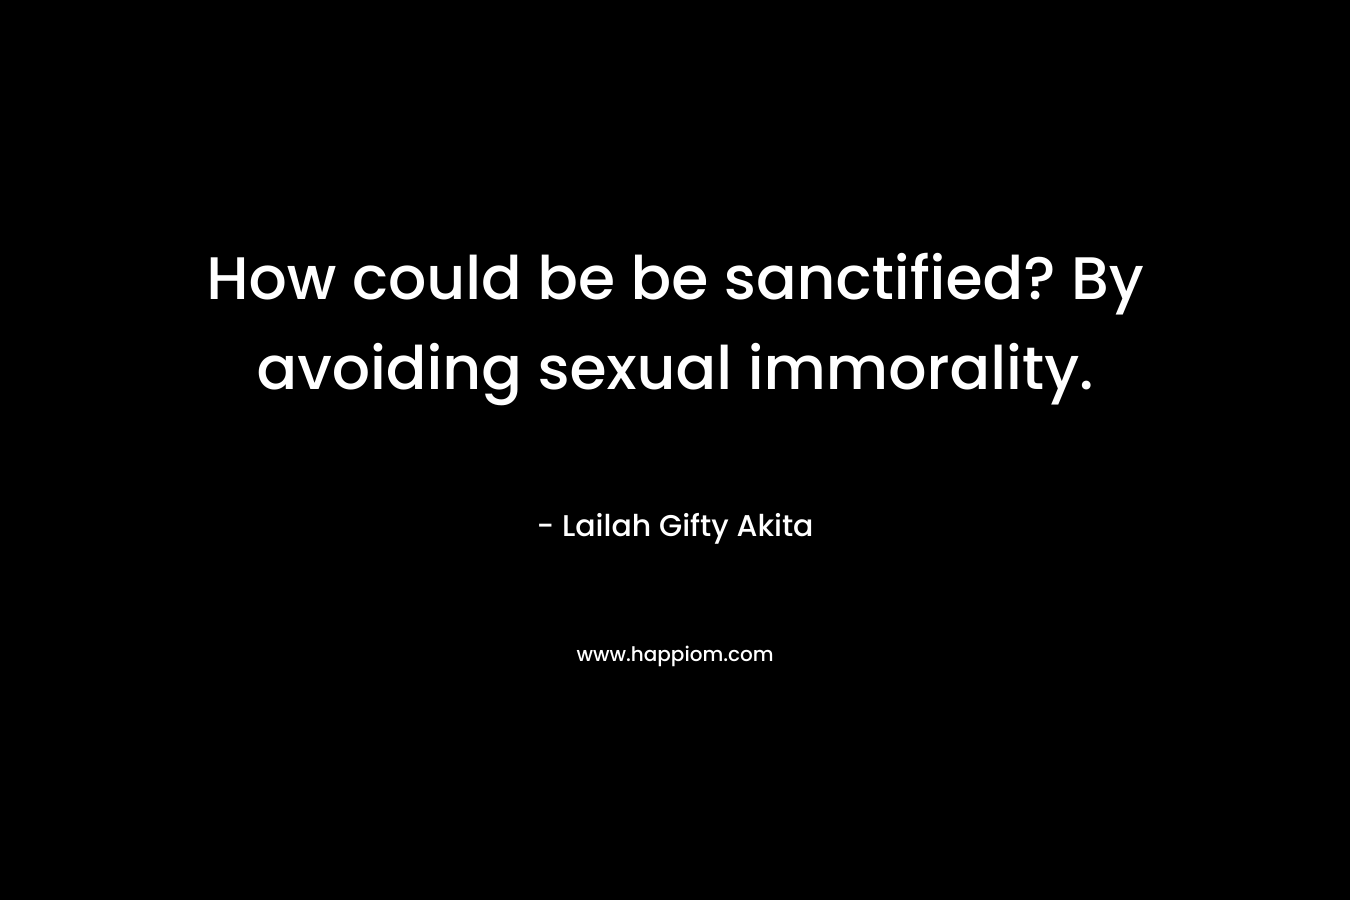 How could be be sanctified? By avoiding sexual immorality.